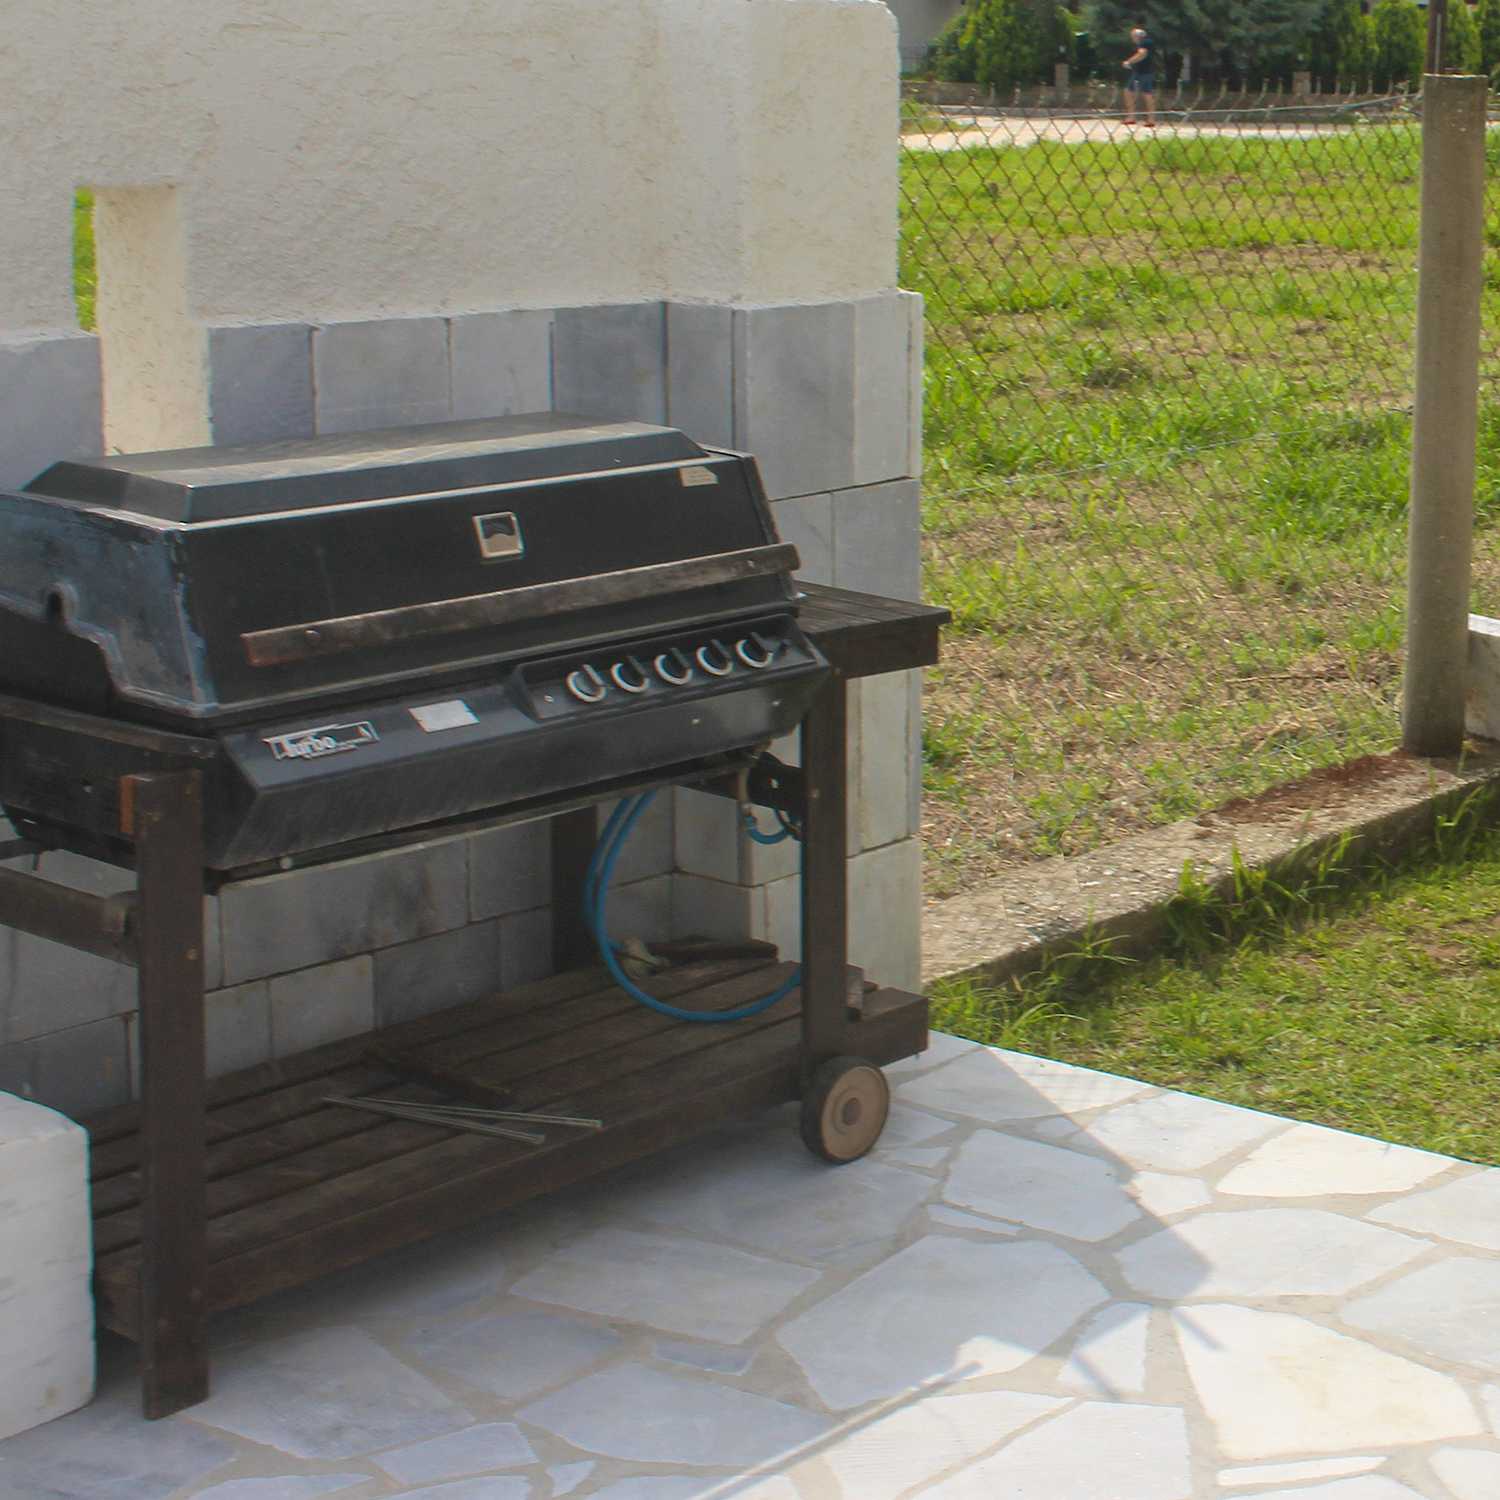 Photo Caption: Have a BBQ with our grill in the garden